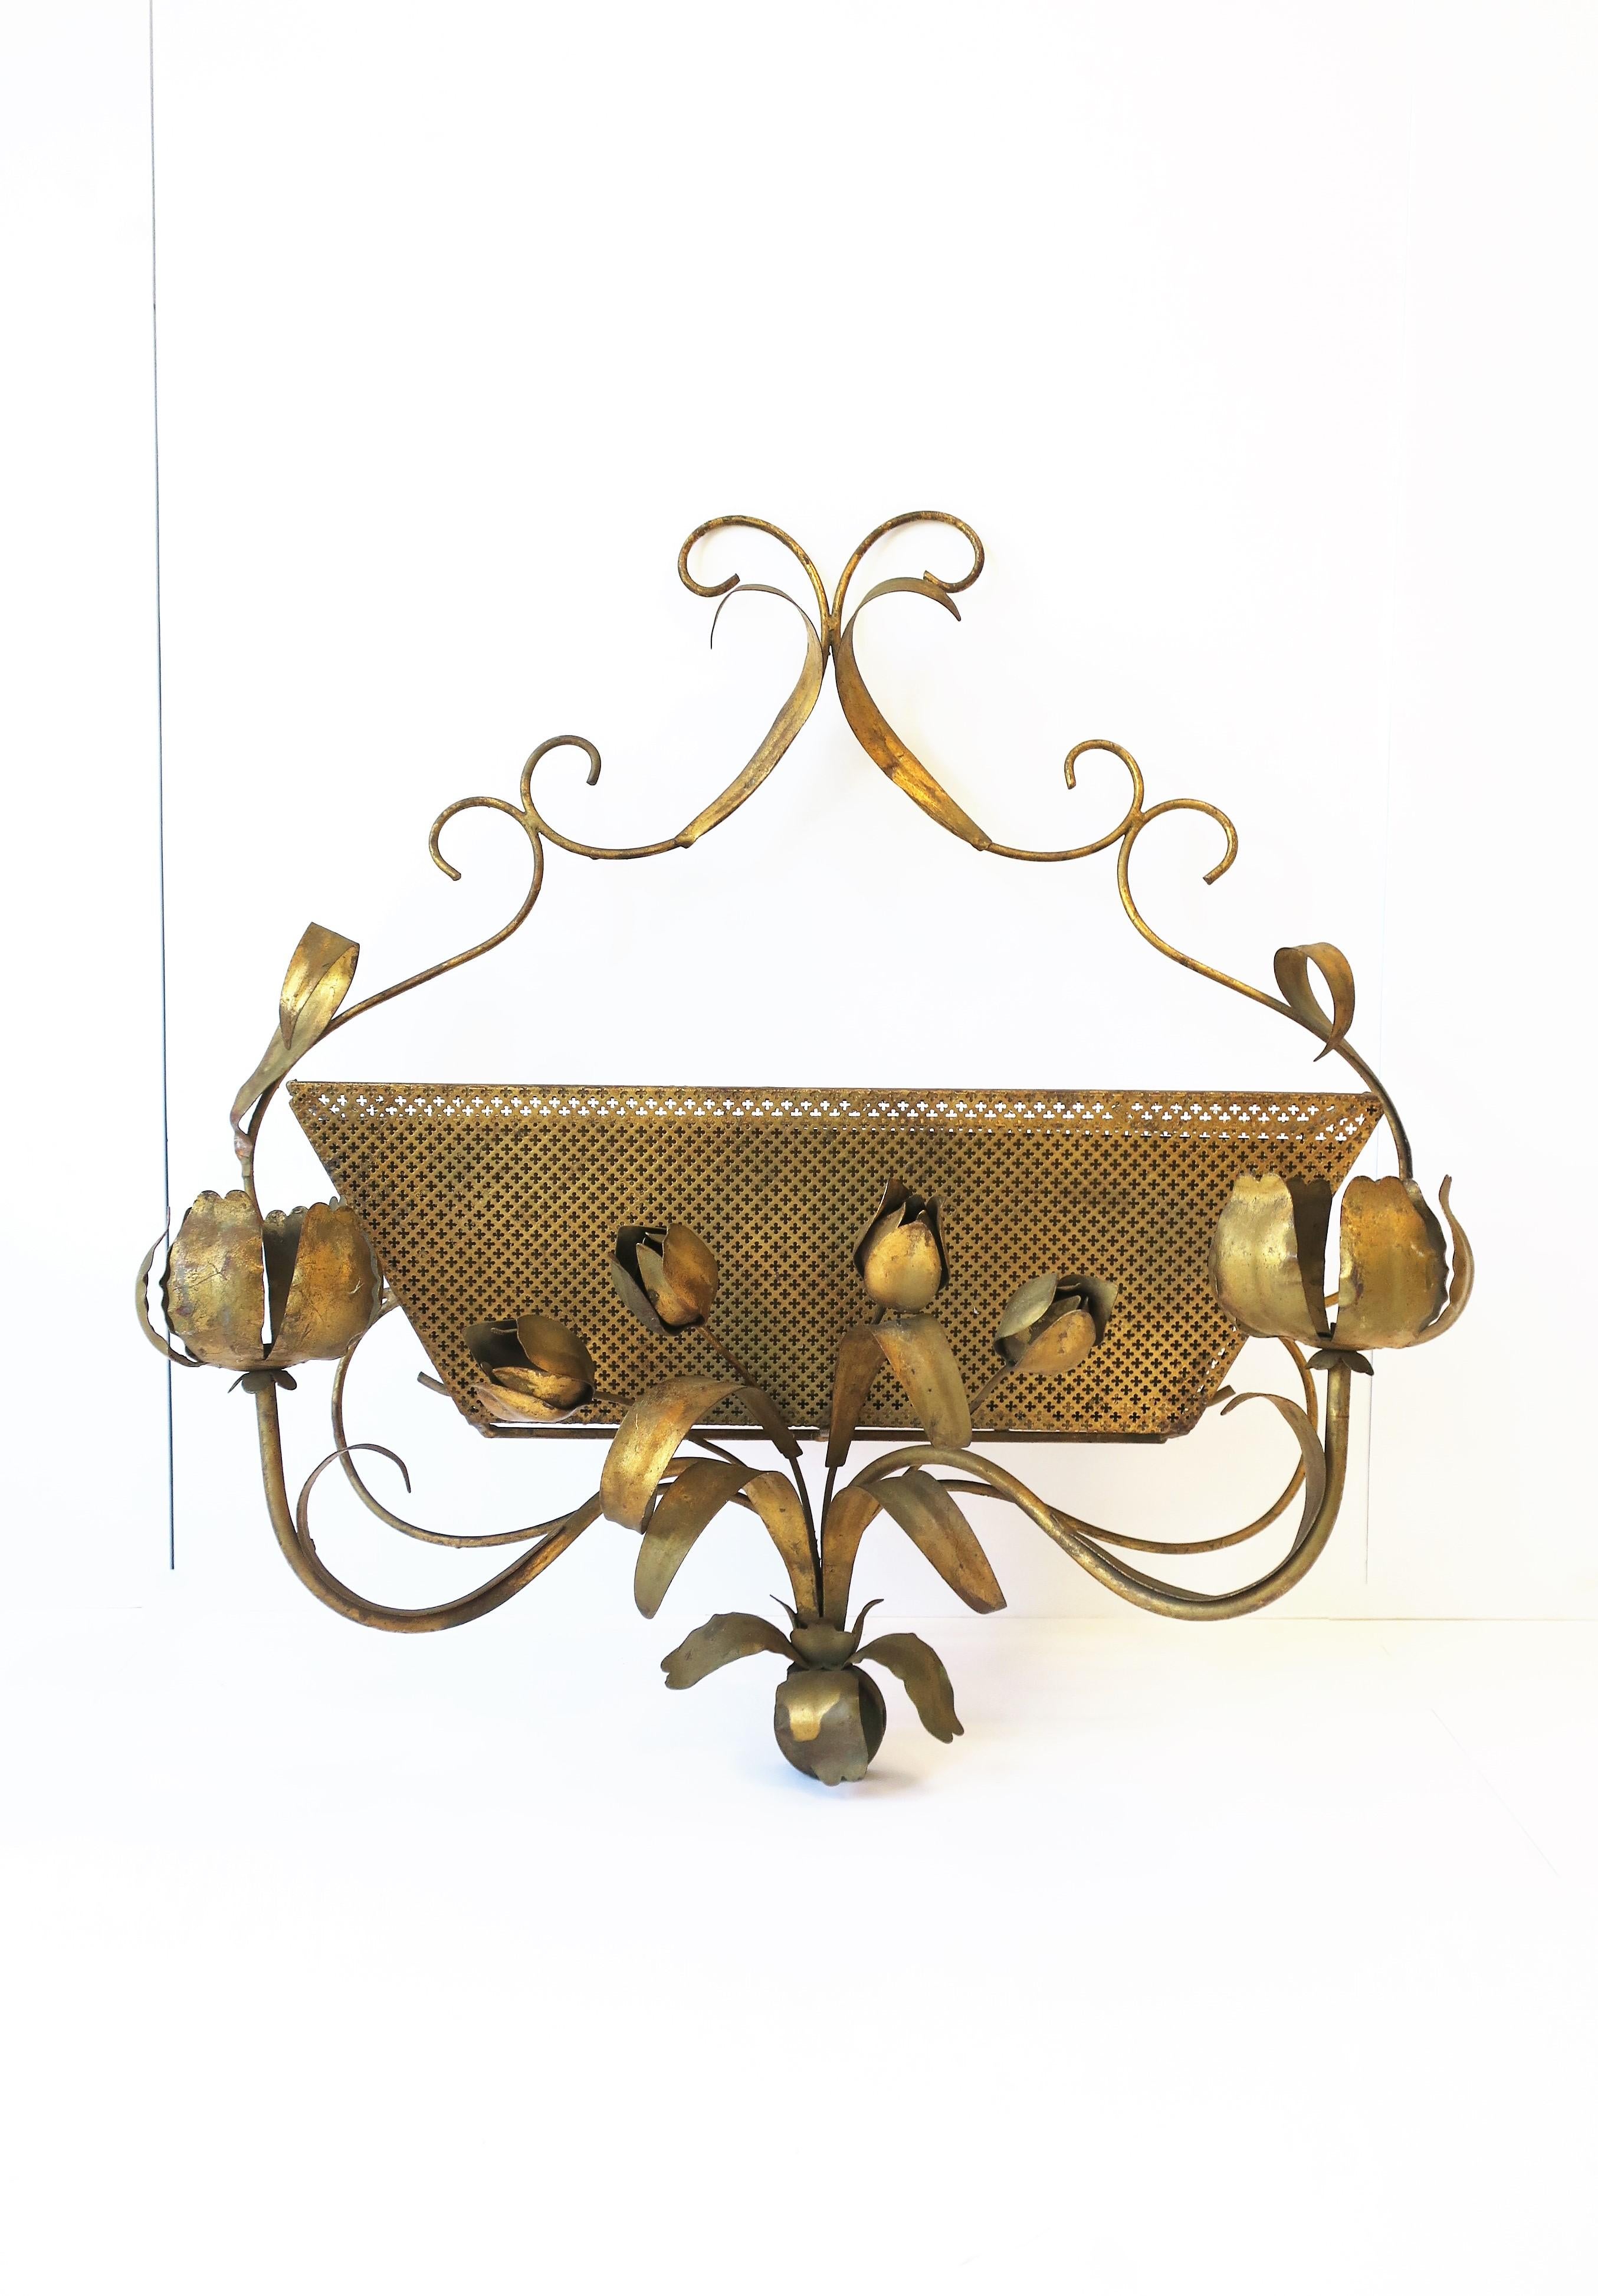 A gold gilt tole metal wall mount planter cachepot jardinière, circa mid to late-20th century, Italy. A beautiful piece embraced by gold gilt tole leaves and flowers (peonies and tulips.) Piece has rectangular insert pot/basket to hold flowers and